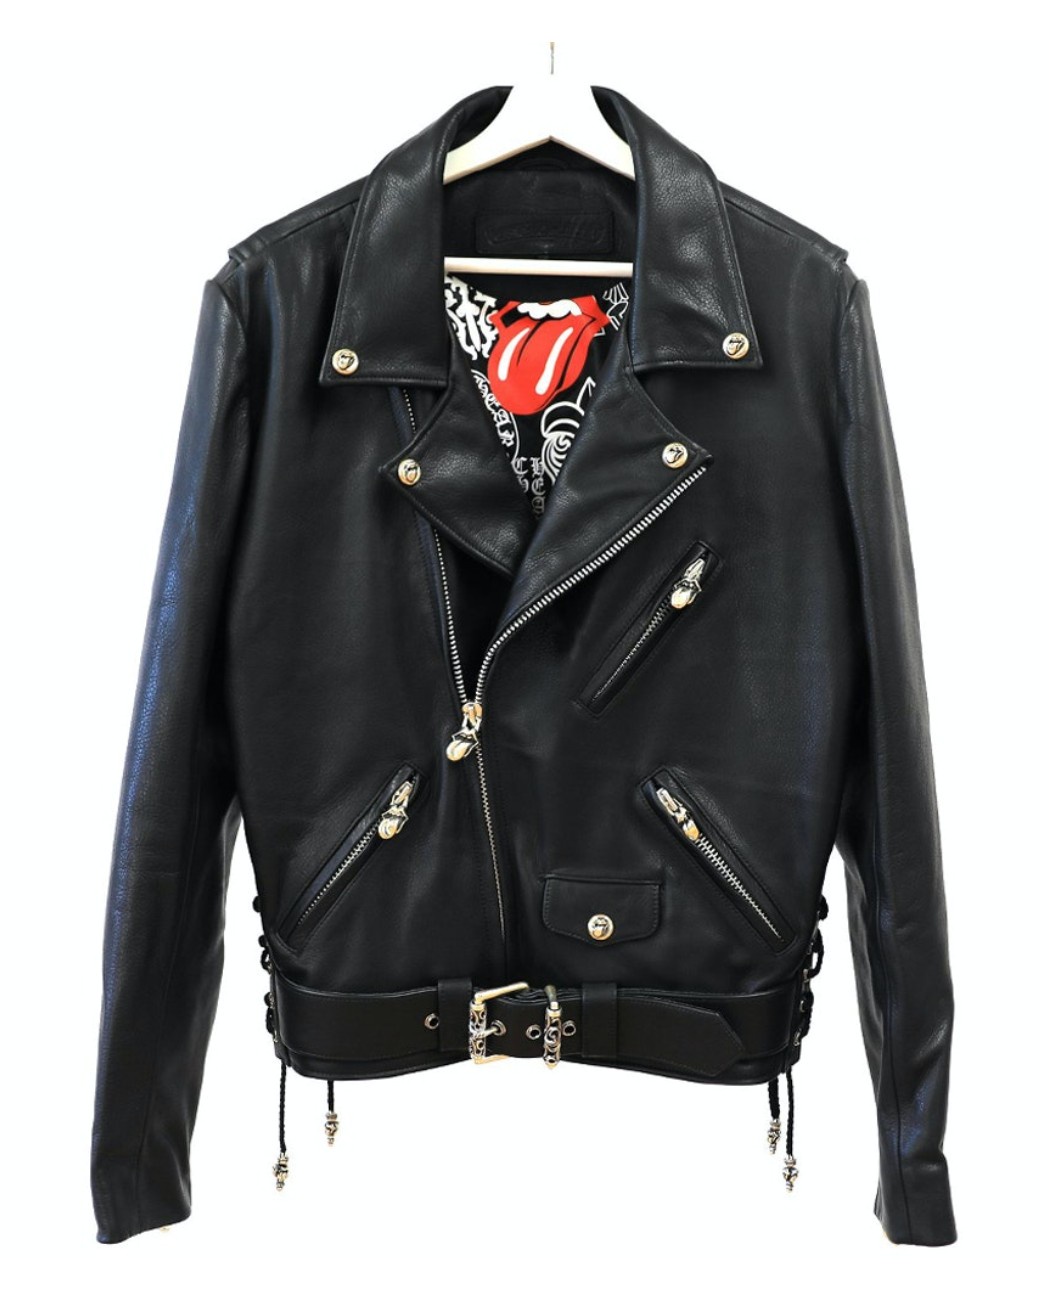 Chrome Hearts Jacket: Elevate Your Style with Edgy Elegance